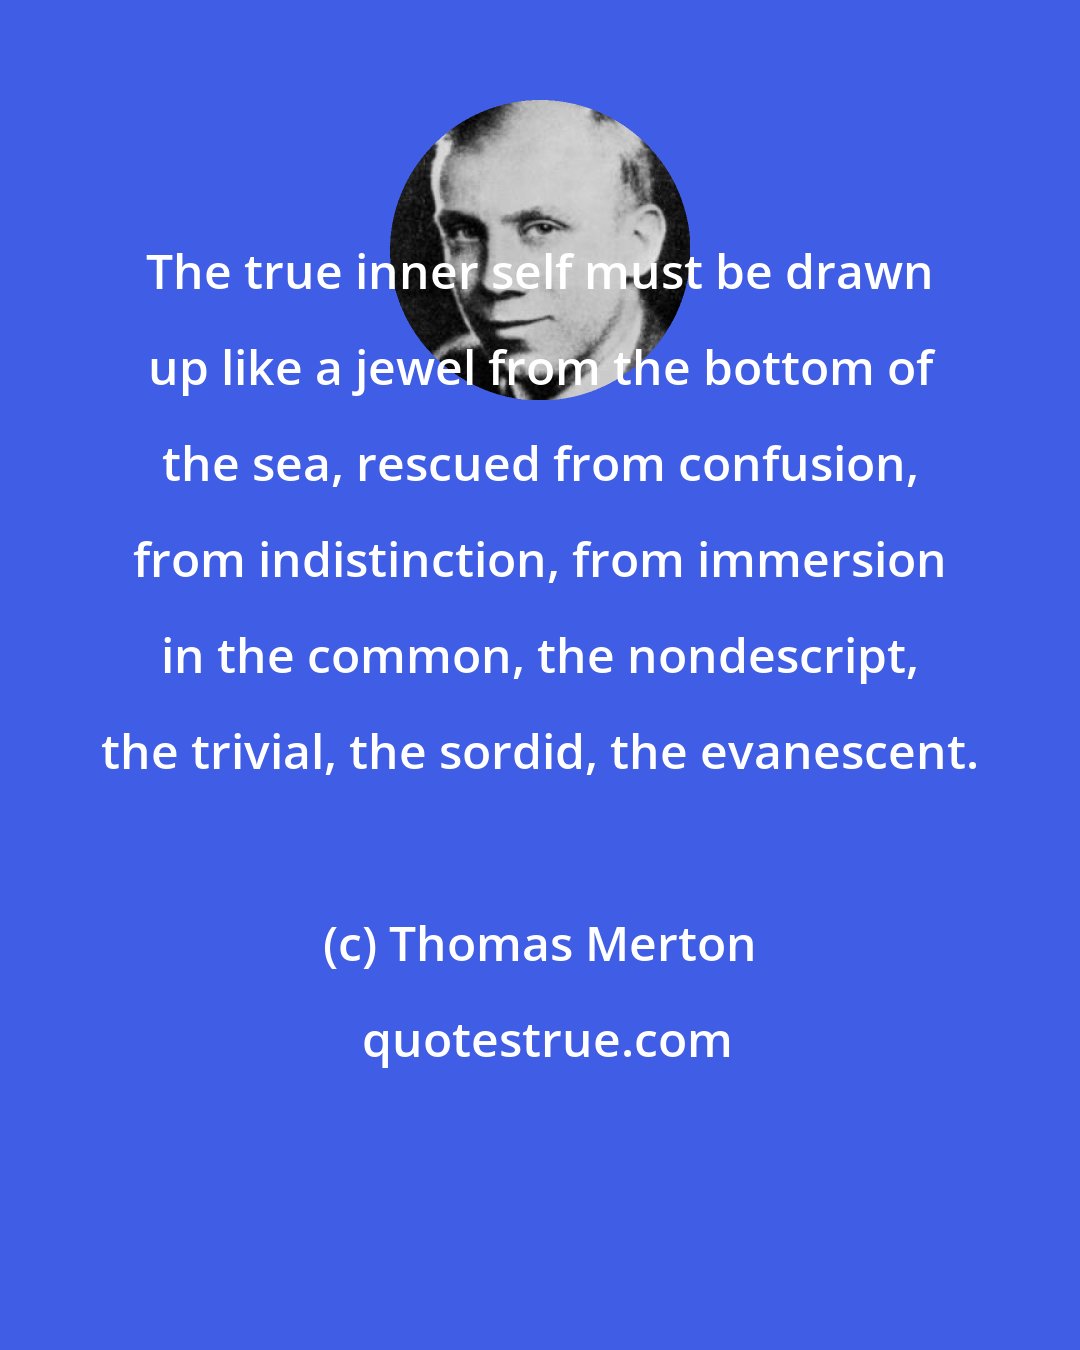 Thomas Merton: The true inner self must be drawn up like a jewel from the bottom of the sea, rescued from confusion, from indistinction, from immersion in the common, the nondescript, the trivial, the sordid, the evanescent.